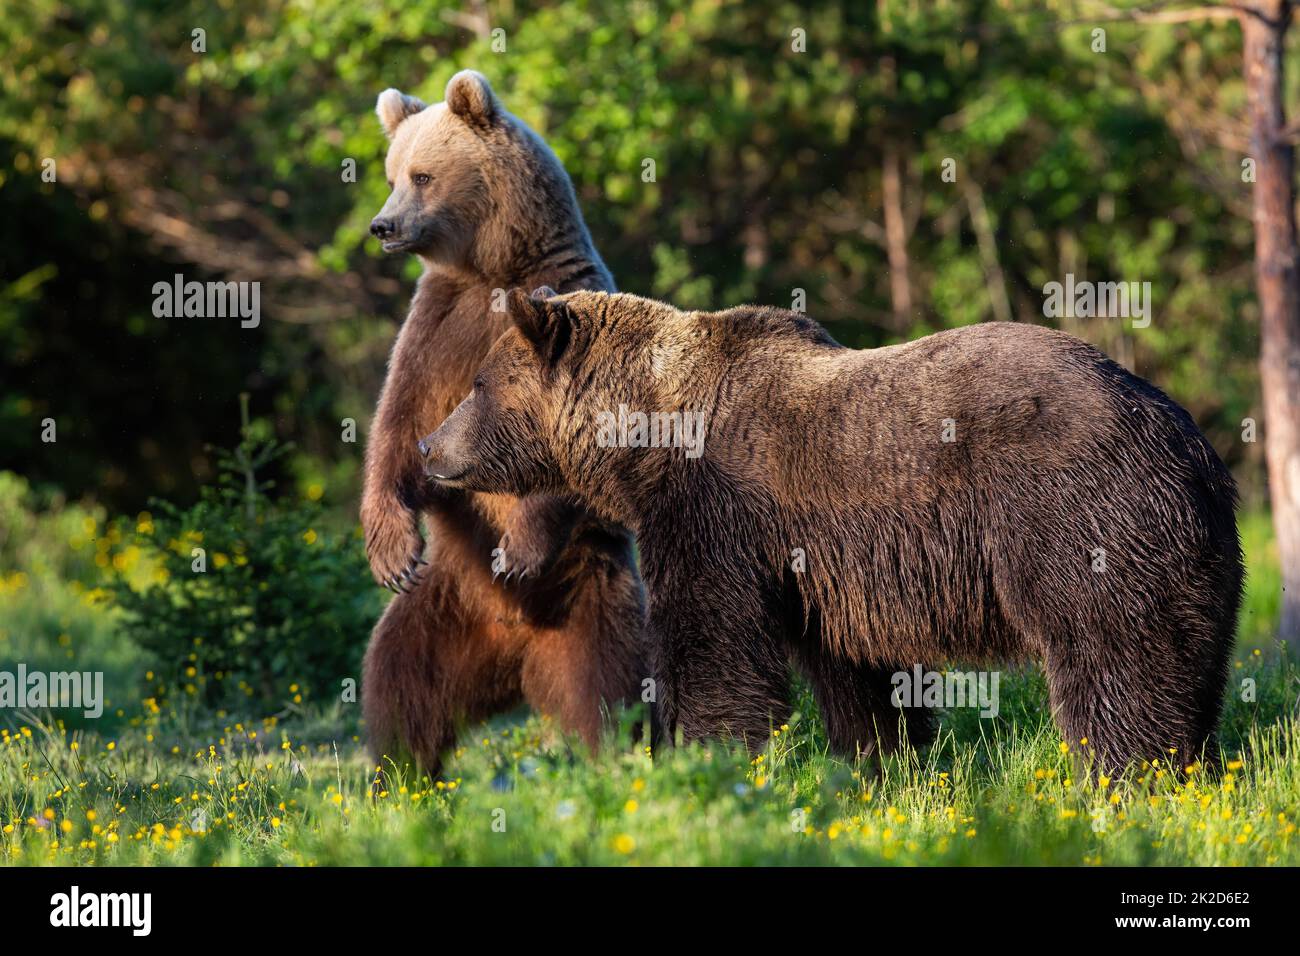 Two brown bears standing in forest in spring nature Stock Photo